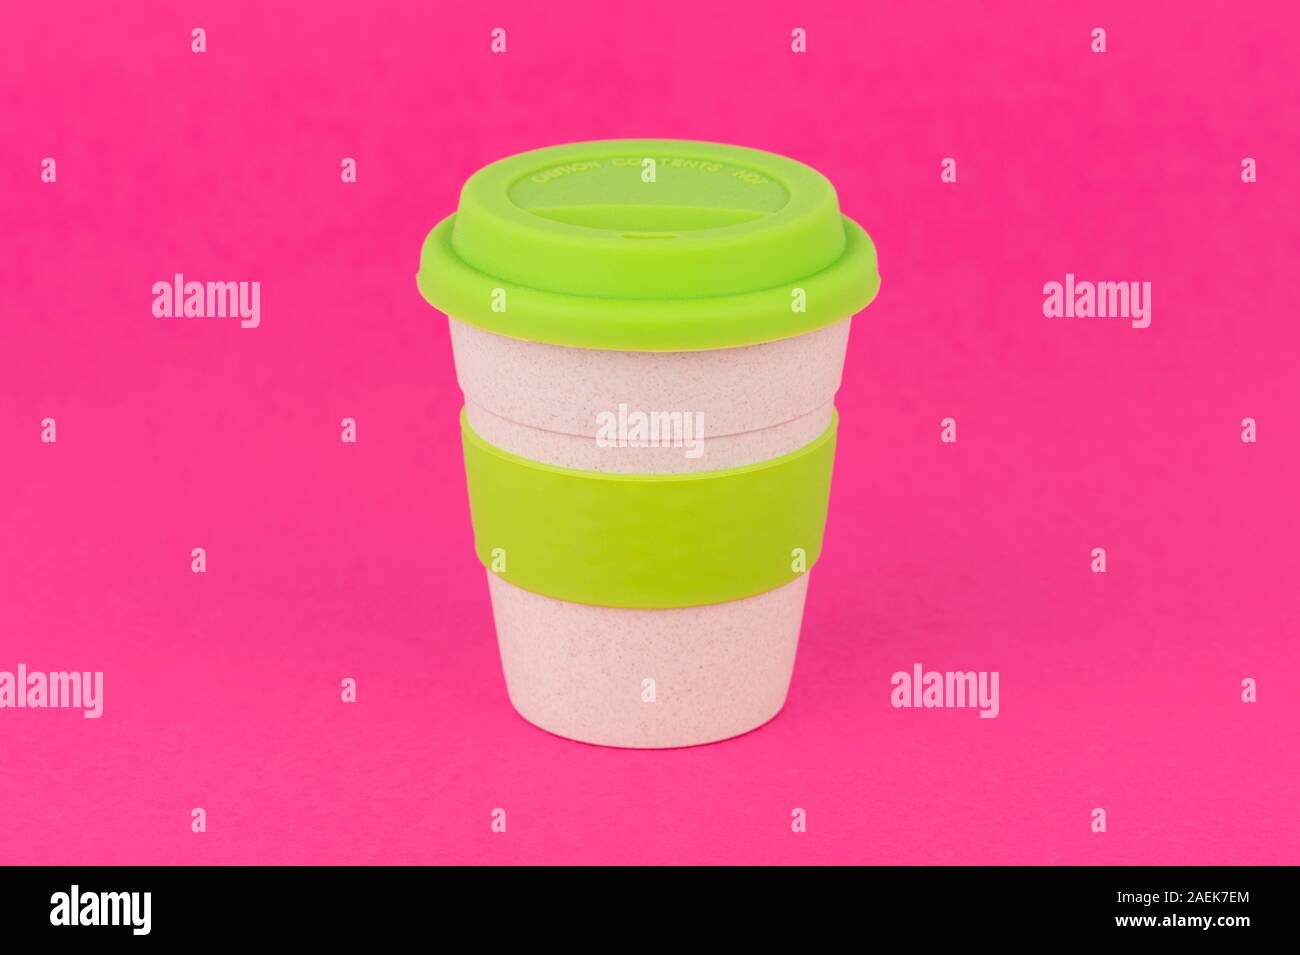 A reusable coffee cup shot on a pink background. Stock Photo